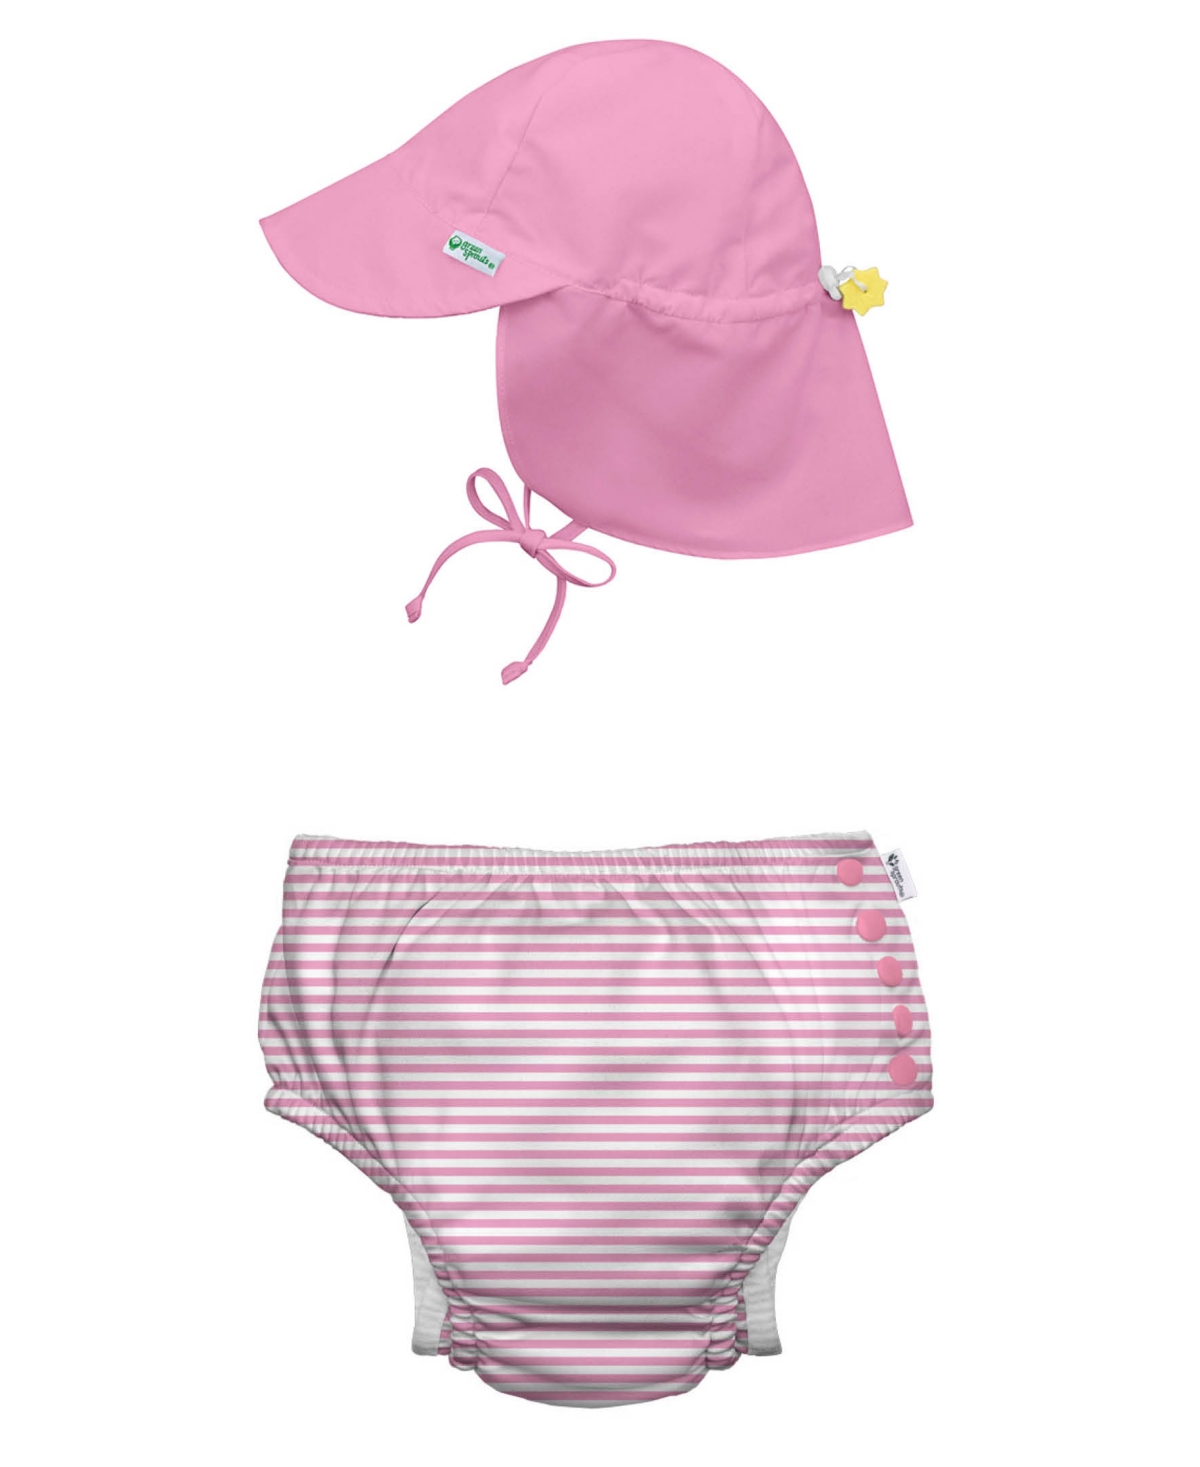 Green Sprouts Kids' Toddler Boys Or Toddler Girls Snap Swim Diaper And Flap Hat, 2 Piece Set In Light Pink Pinstripe